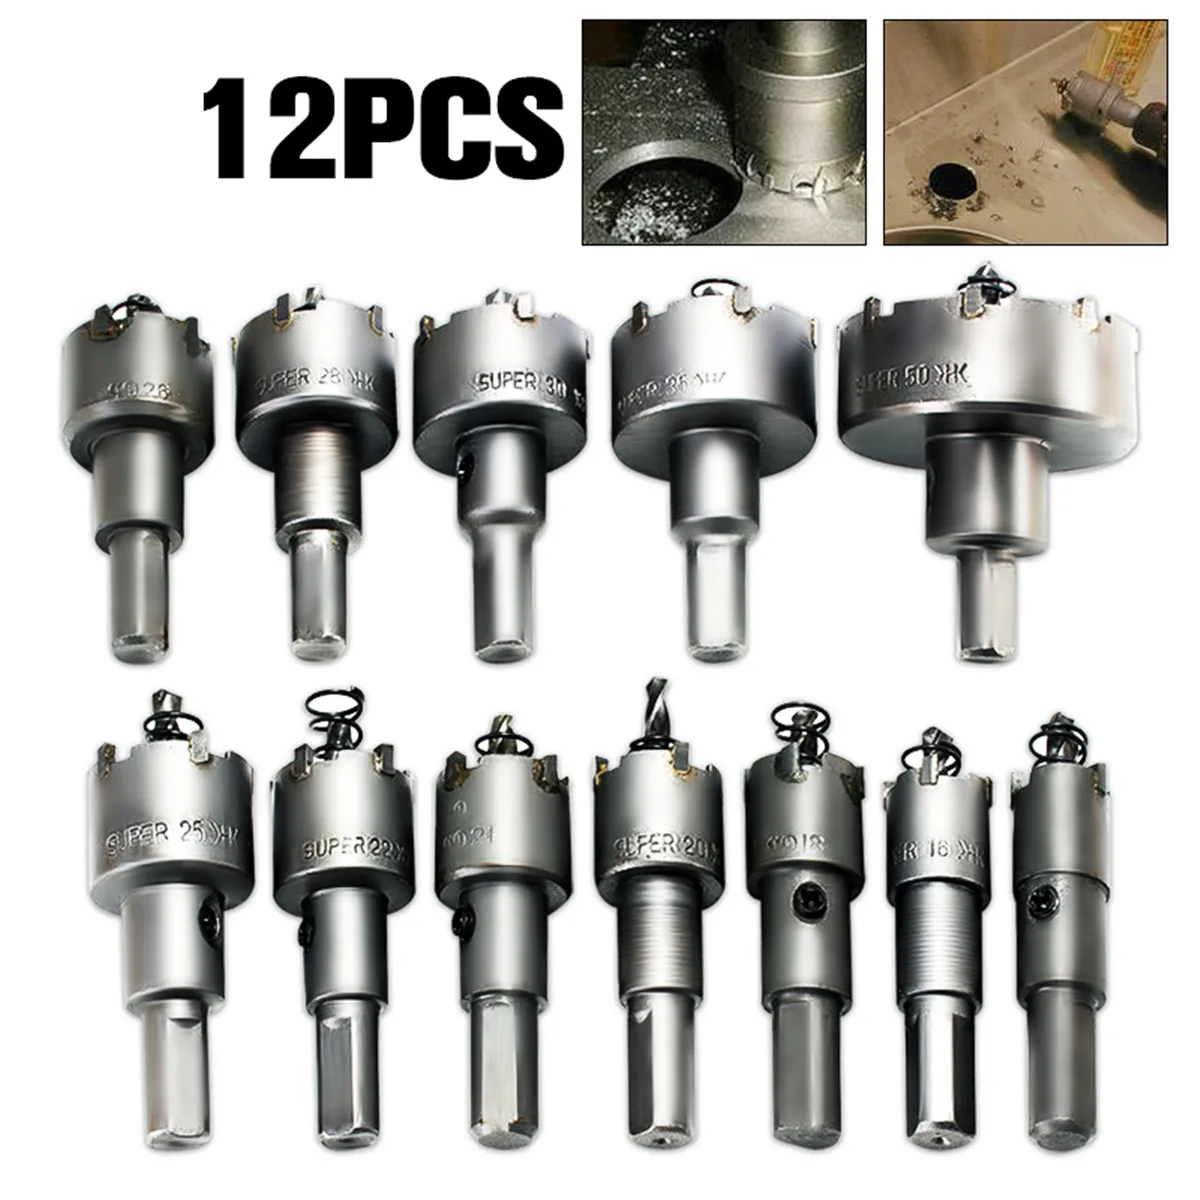 12Pcs/Set 15mm-50mm Metal Hole Saw Tooth Kit Drill Bit Set Stainless Steel Alloy Wood Cutter Universal Metal Cutter Tool